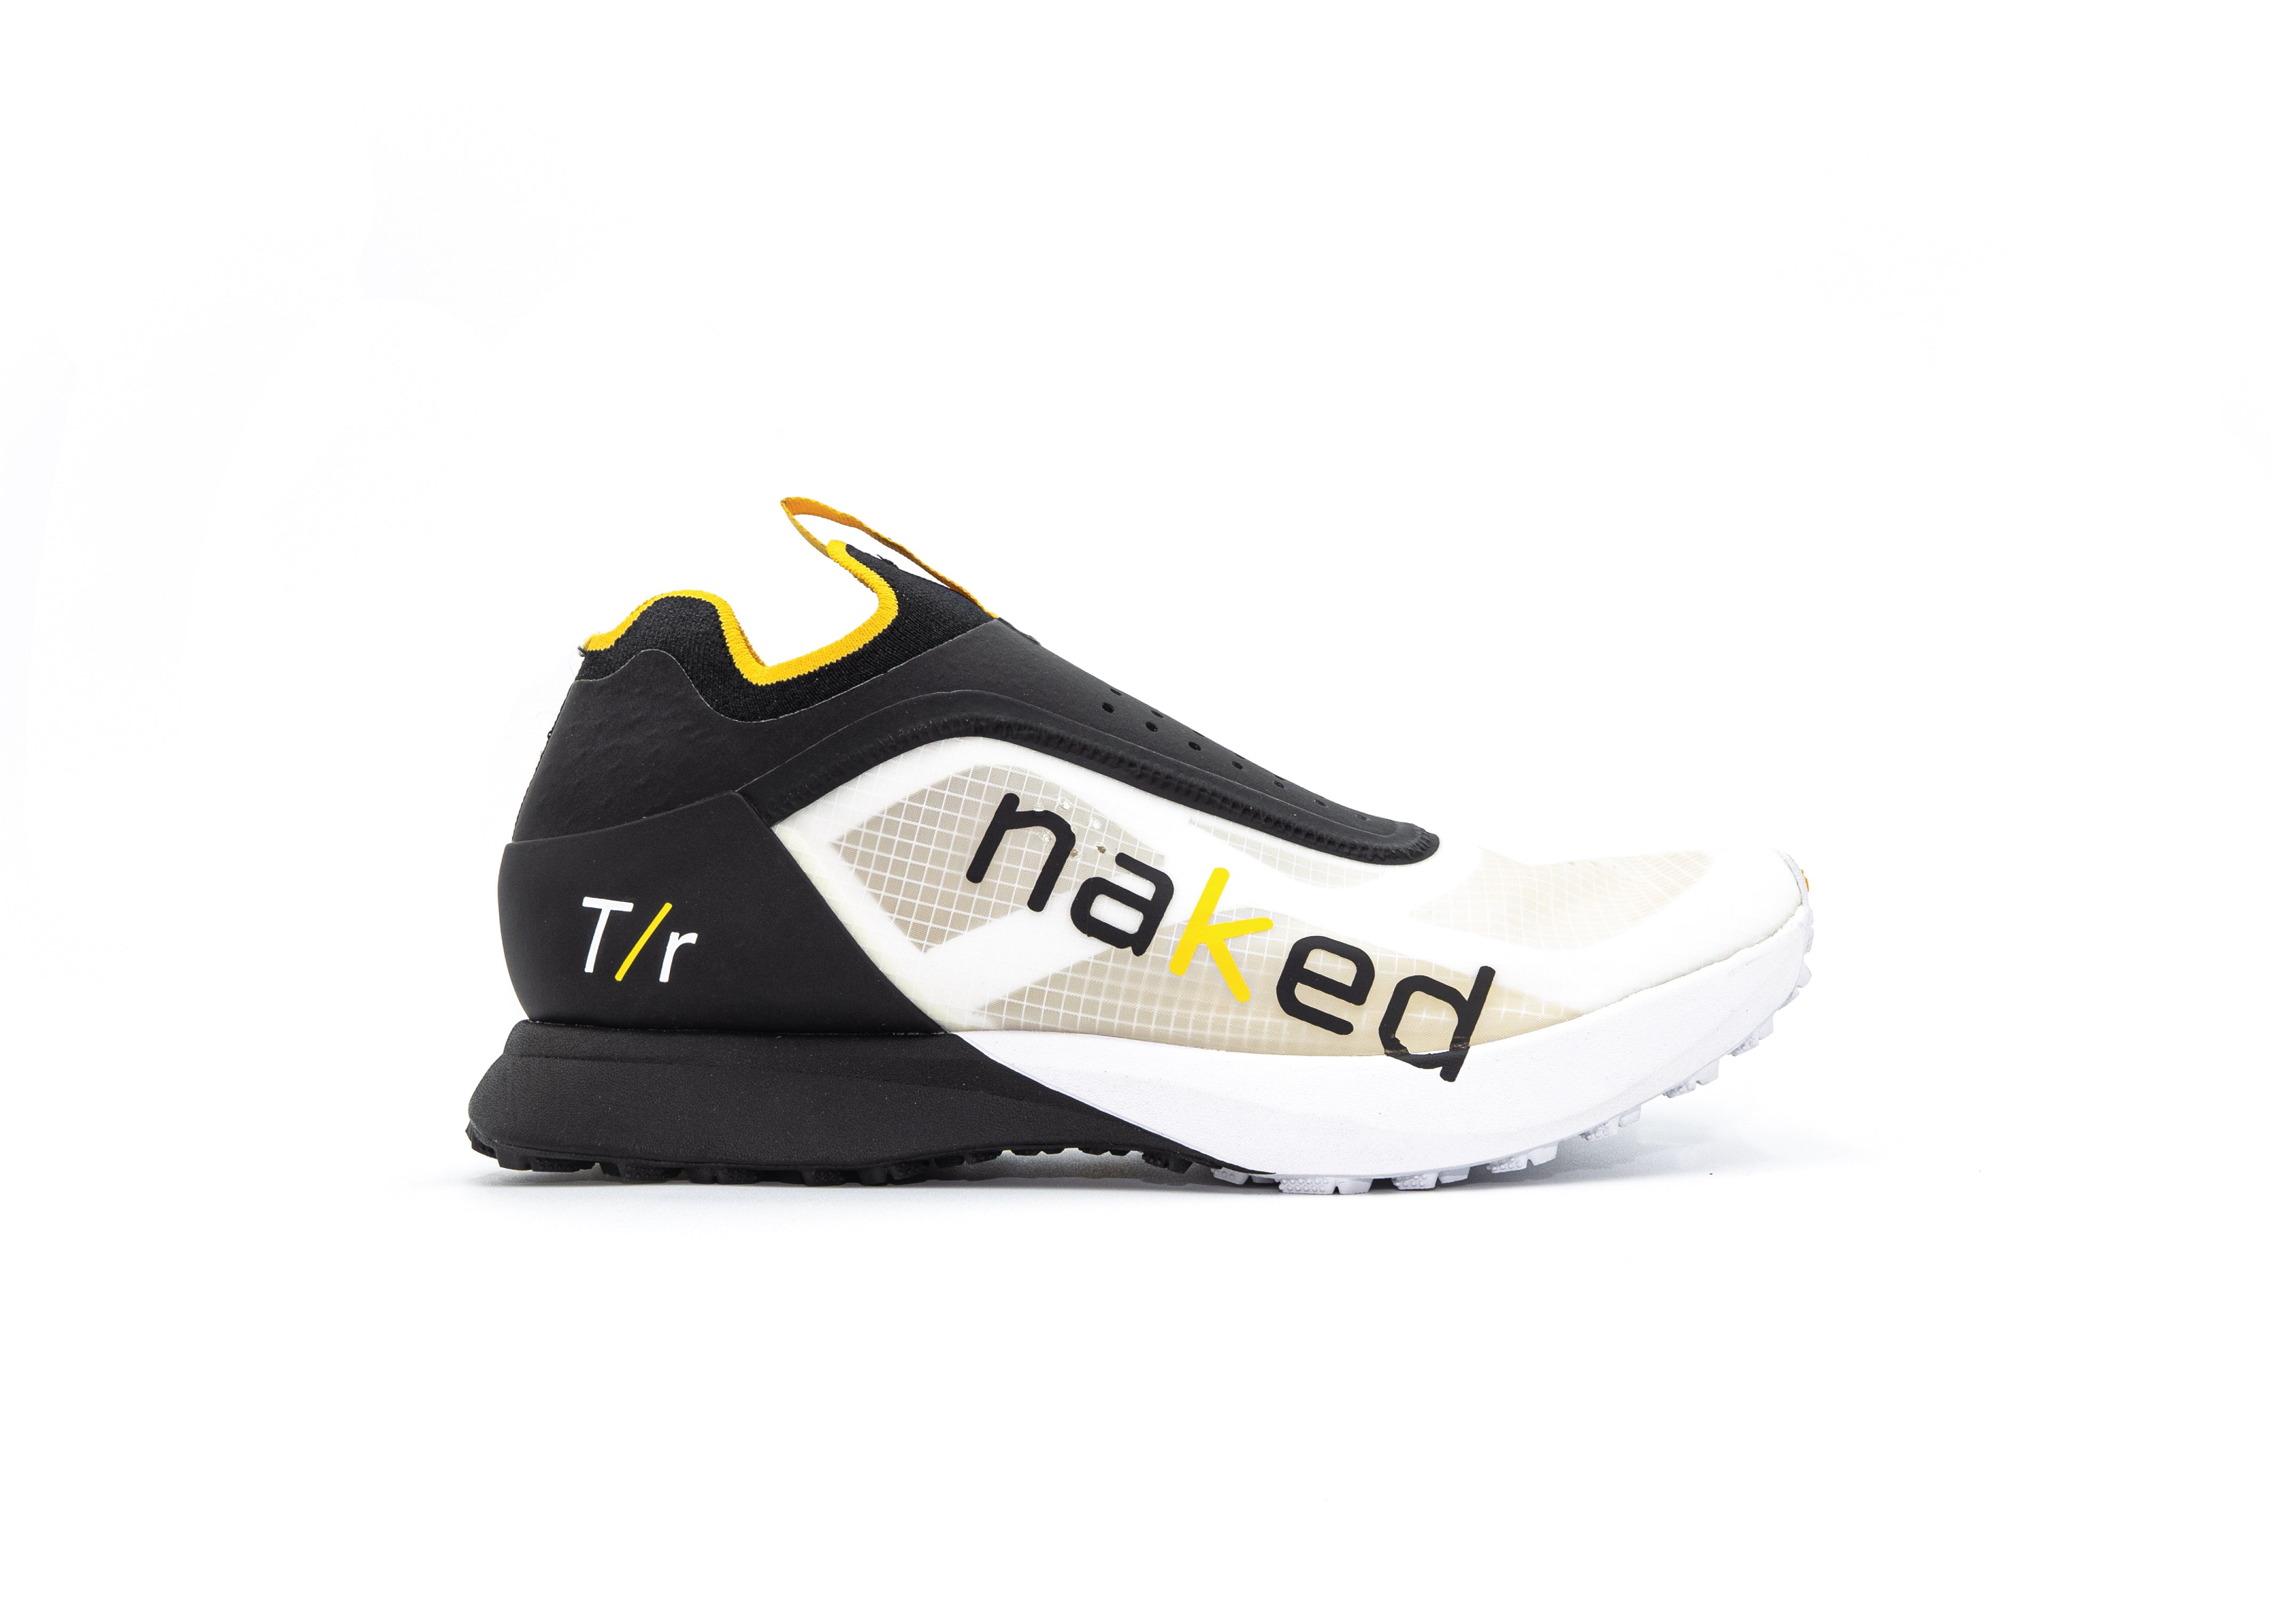 Naked® T/r Trail Racing Shoe – Naked Sports Innovations